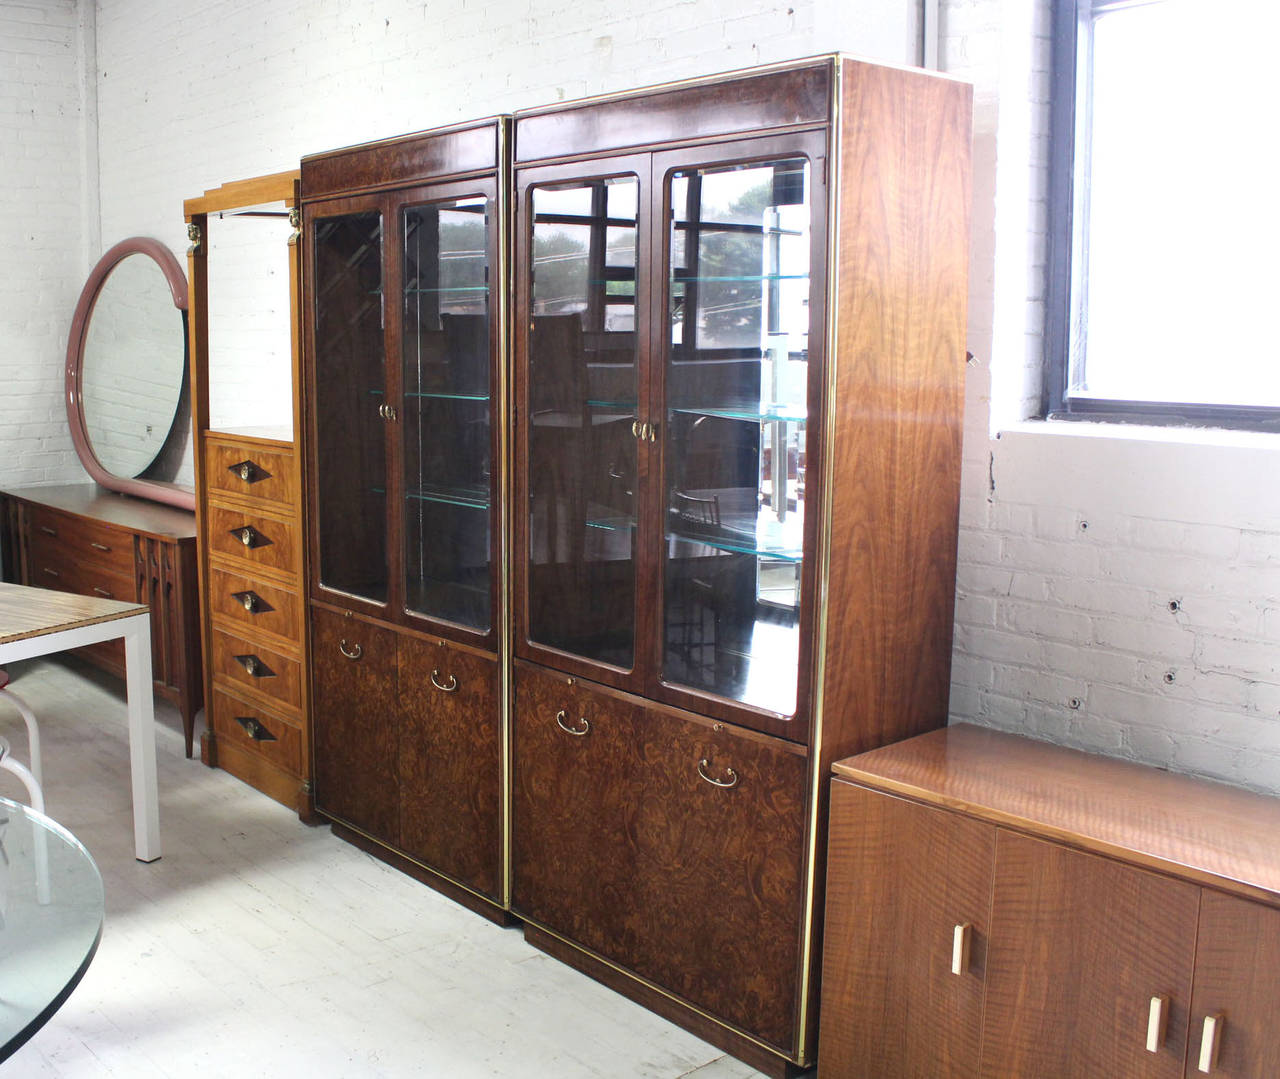 Pair of burl wood vitrines show cases wall units. Outstanding craftsmanship featuring pull out tray serving area. 